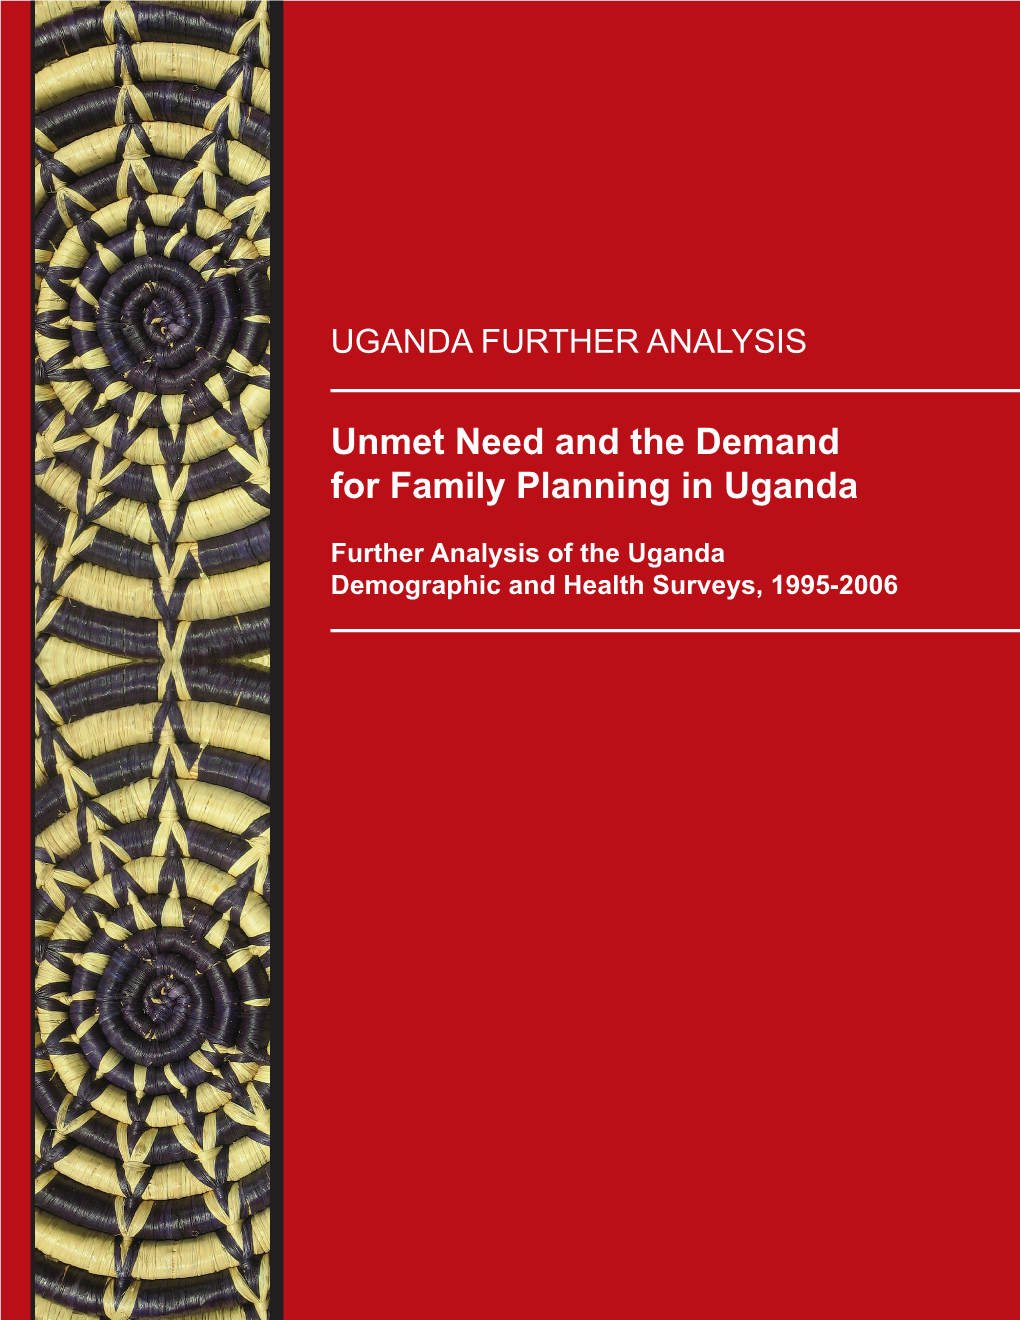 Unmet Need and the Demand for Family Planning in Uganda